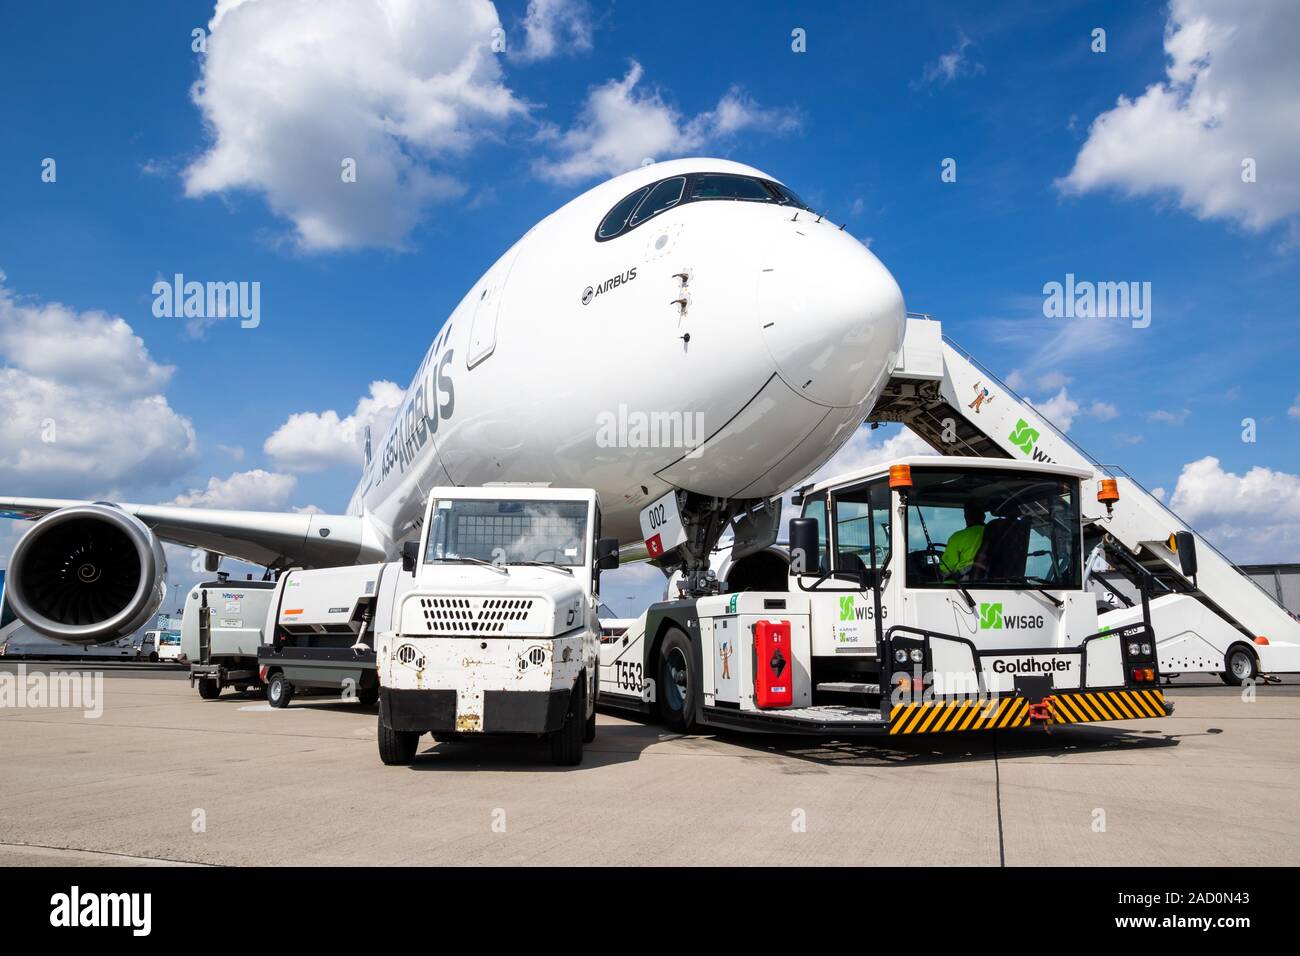 BERLIN, GERMANY - APR 27, 2018: New modern Airbus A350 XWB passenger jet plane about to be towed by an airport towing vehicle on Berlin-Schonefeld Int Stock Photo